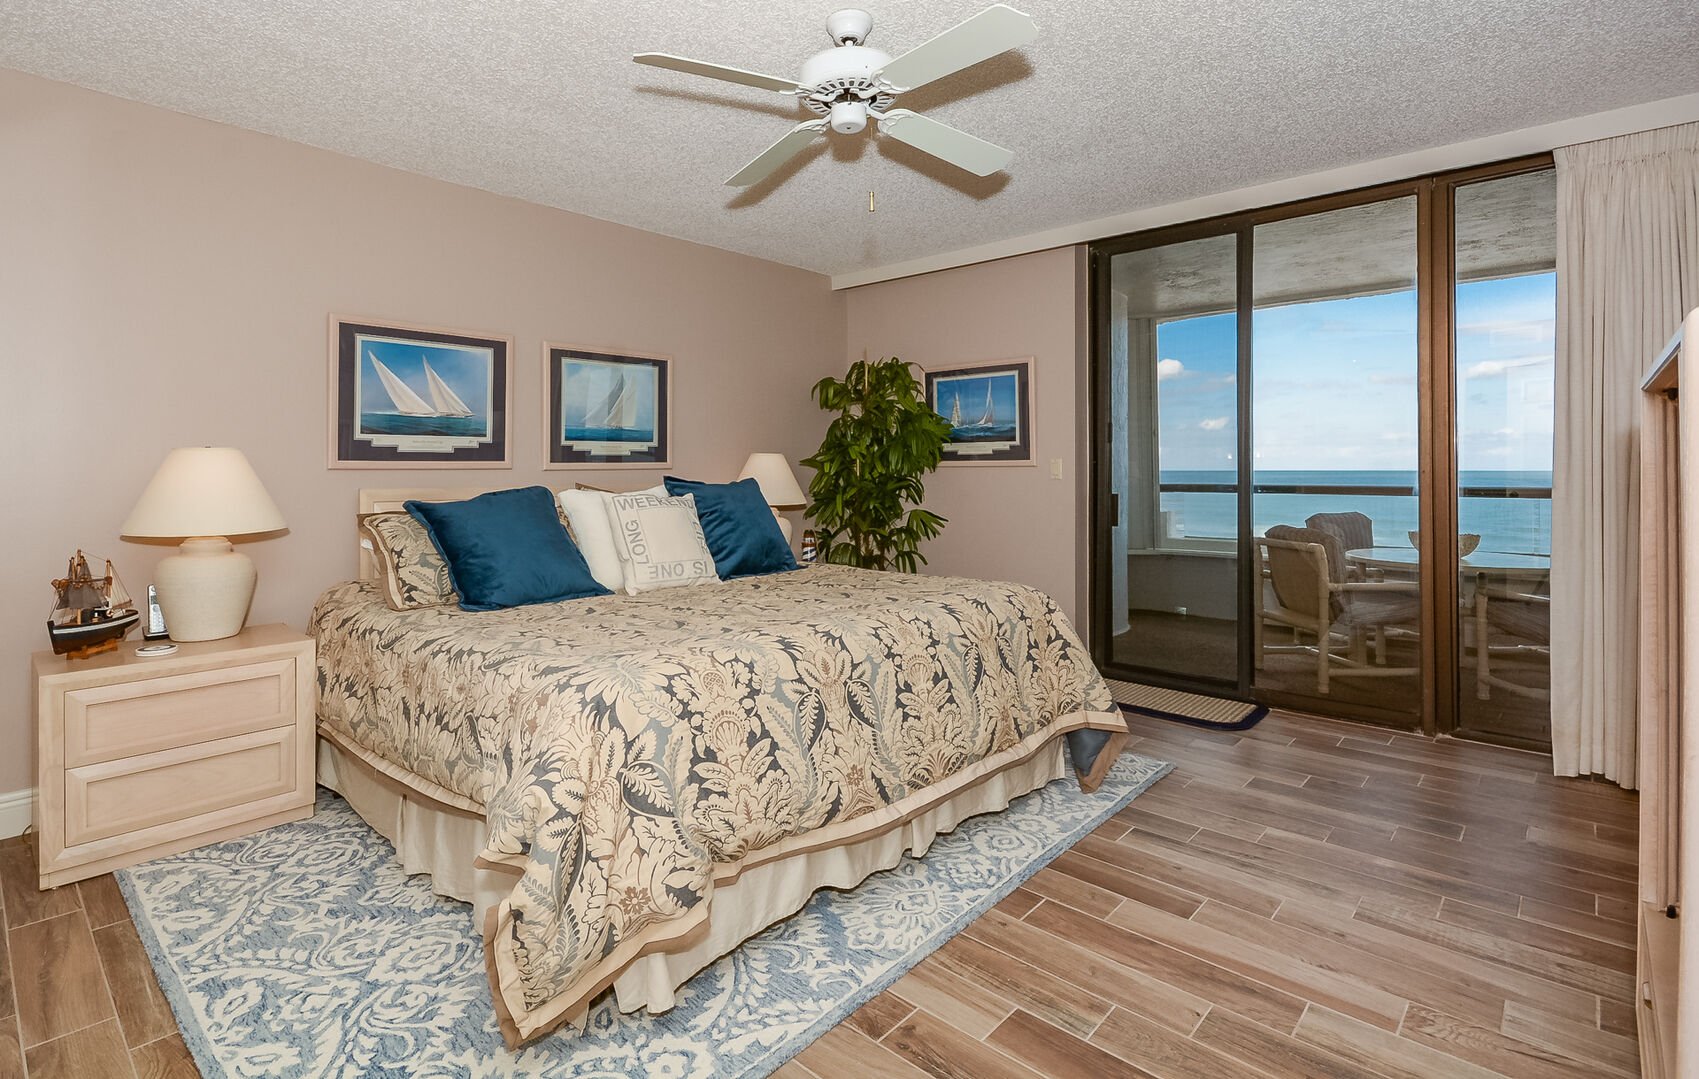 Beautiful view from the sliding glass door of the master bedroom of this New Smyrna Beach rental.